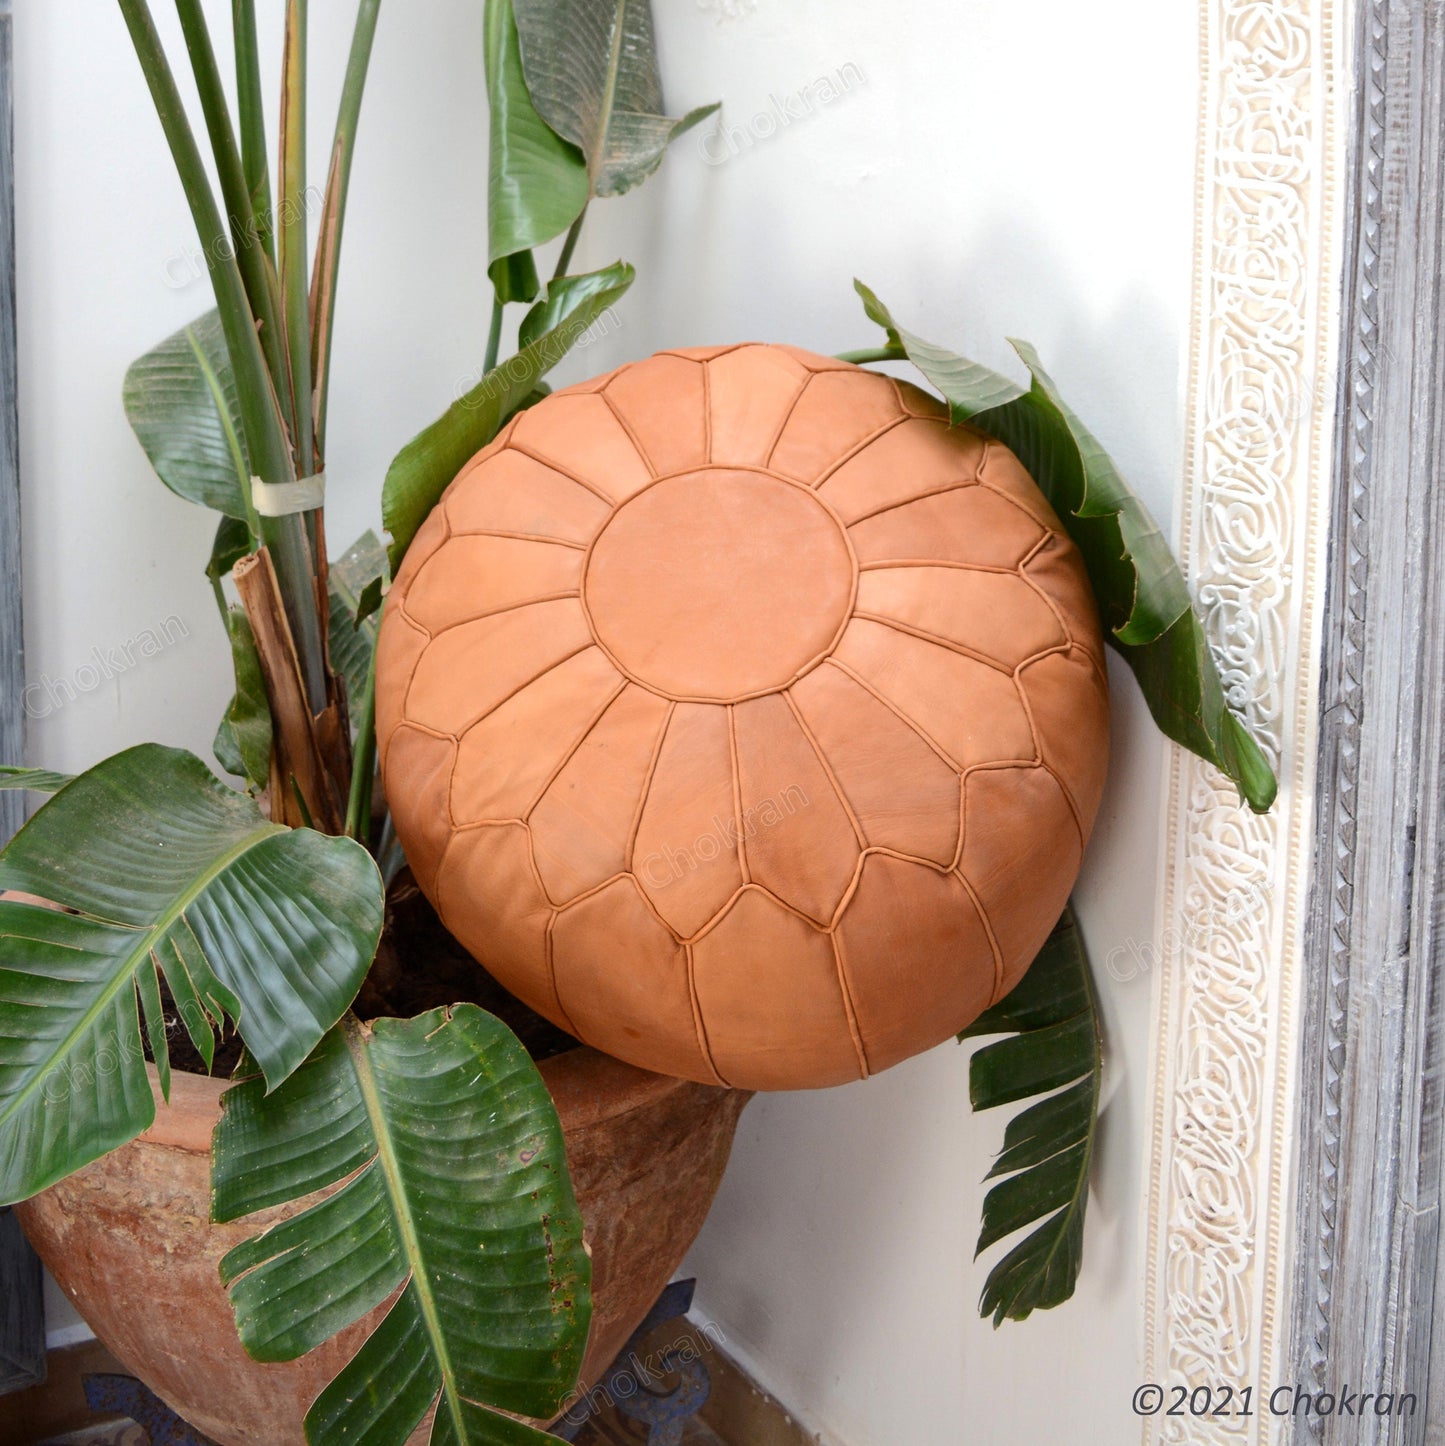 Gorgeous Moroccan leather pouf, round leather ottoman, handmade leather pouf, Moroccan genuine leather footstool-UNSTUFFED